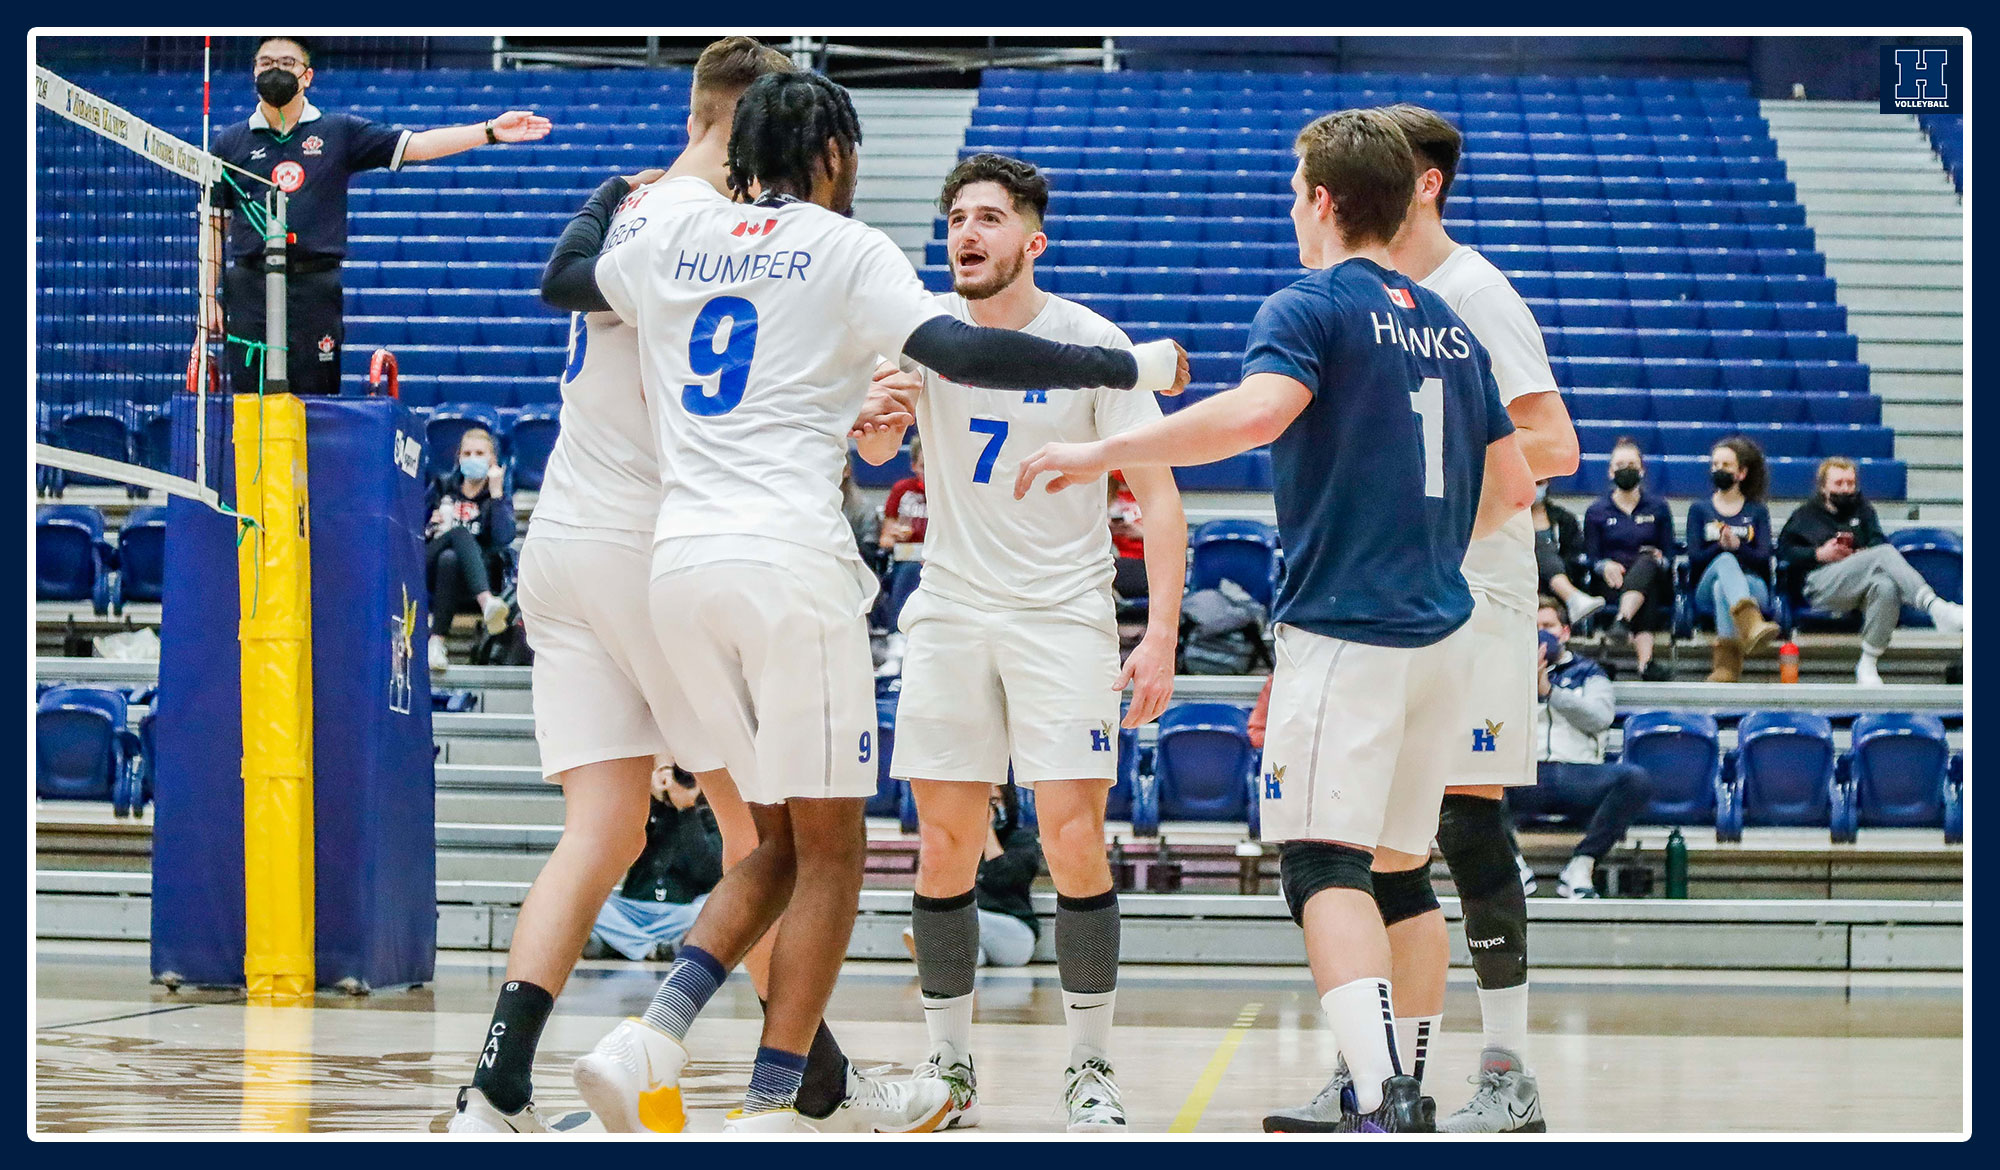 Men's volleyball celebrate a point against Redeemer